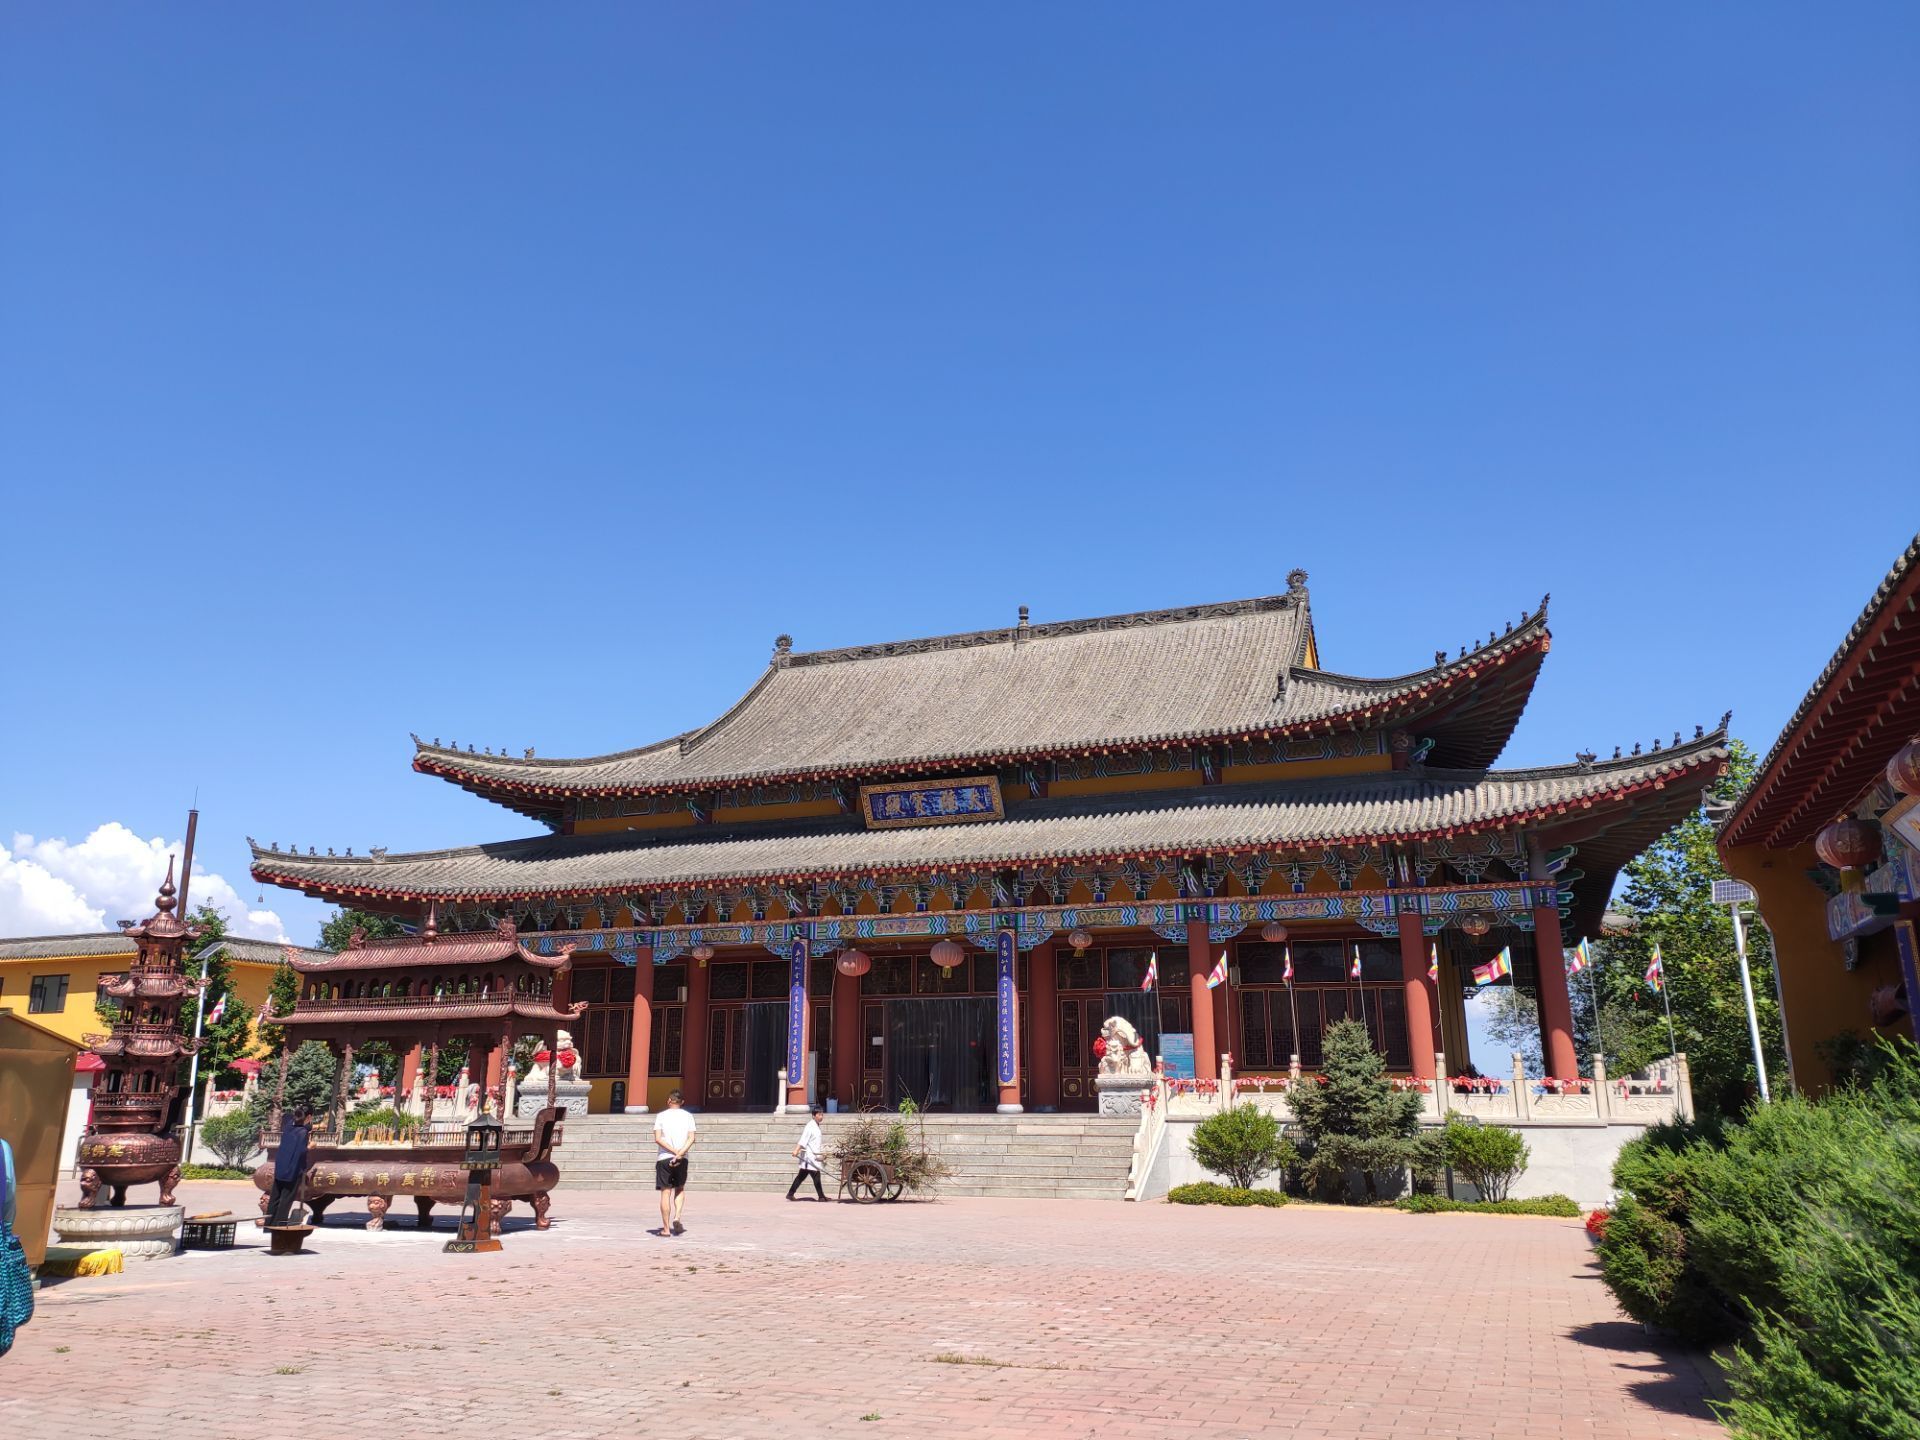 The Daming Palace was the imperial palace complex of the Tang Dynasty ...